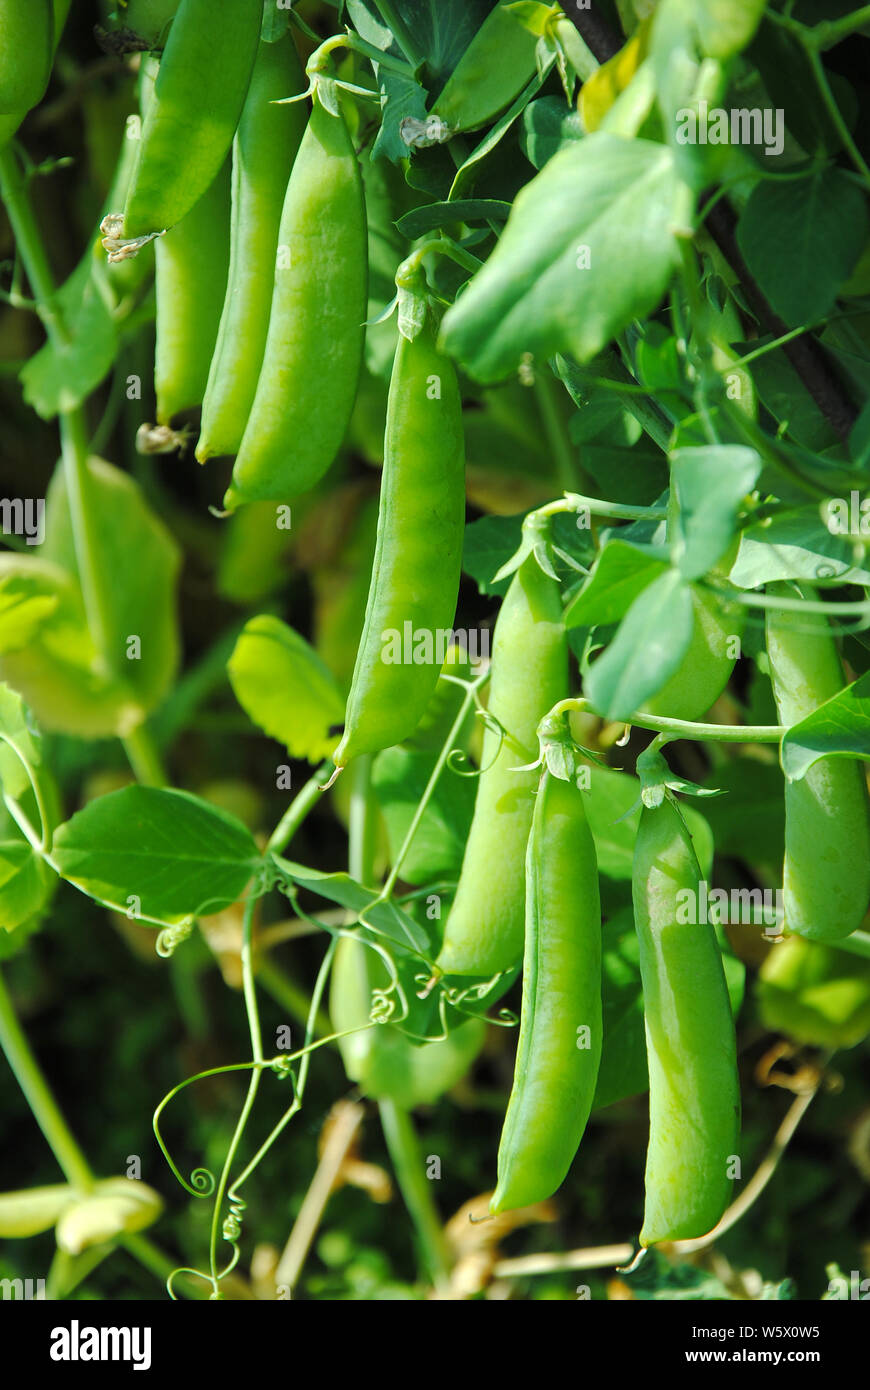 The  stems of peas in the vegetable garden Stock Photo